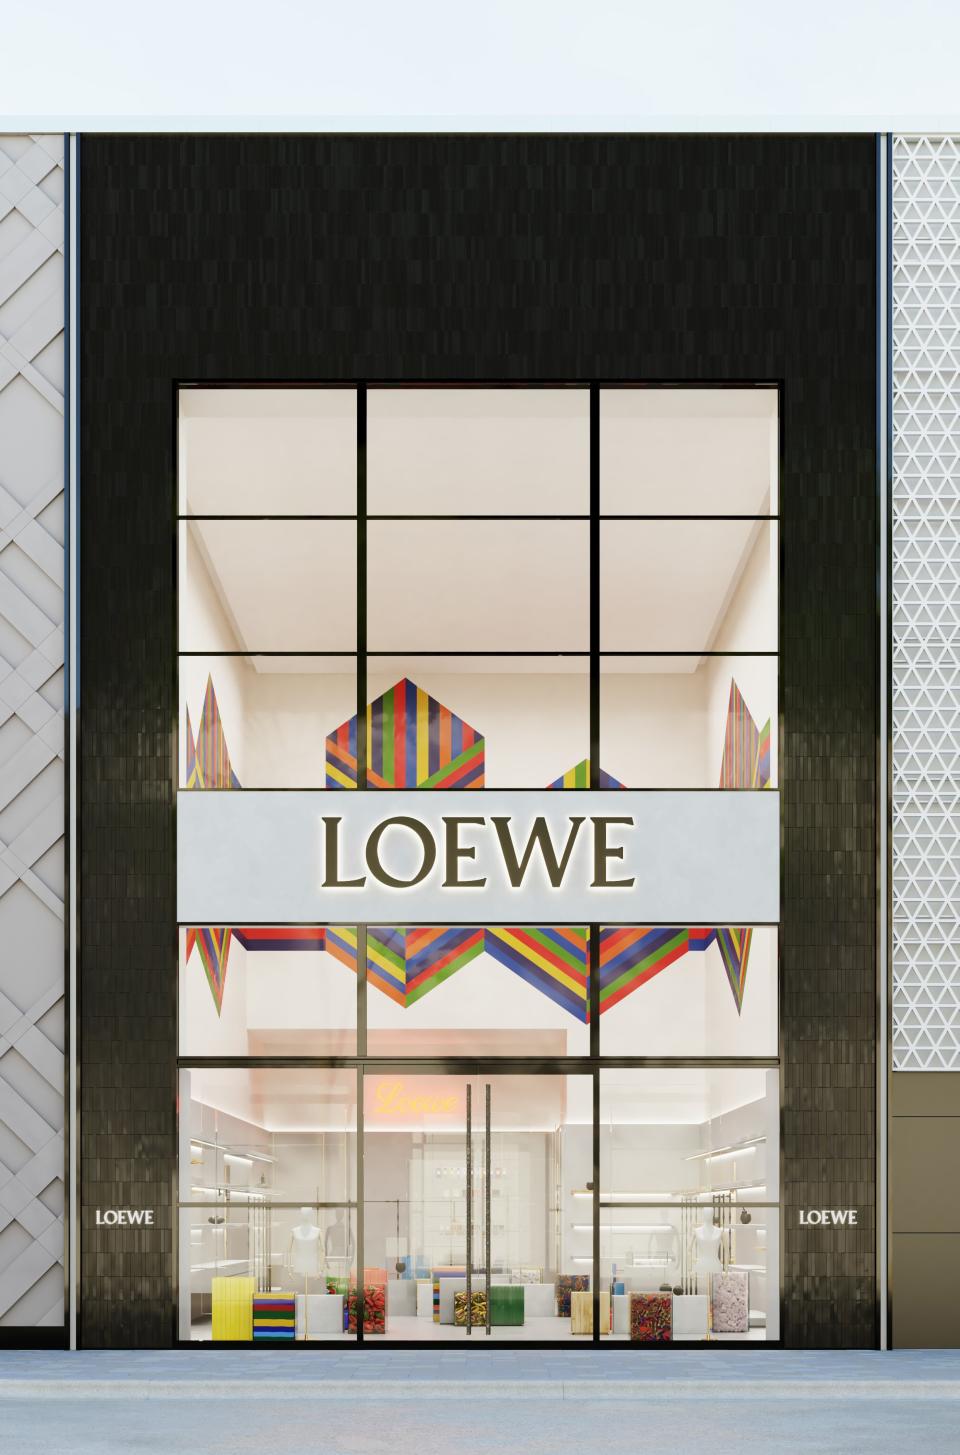 A wall painting by Sol LeWitt dominates the refurbished Loewe boutique in Miami’s Design District. - Credit: Courtesy of Loewe